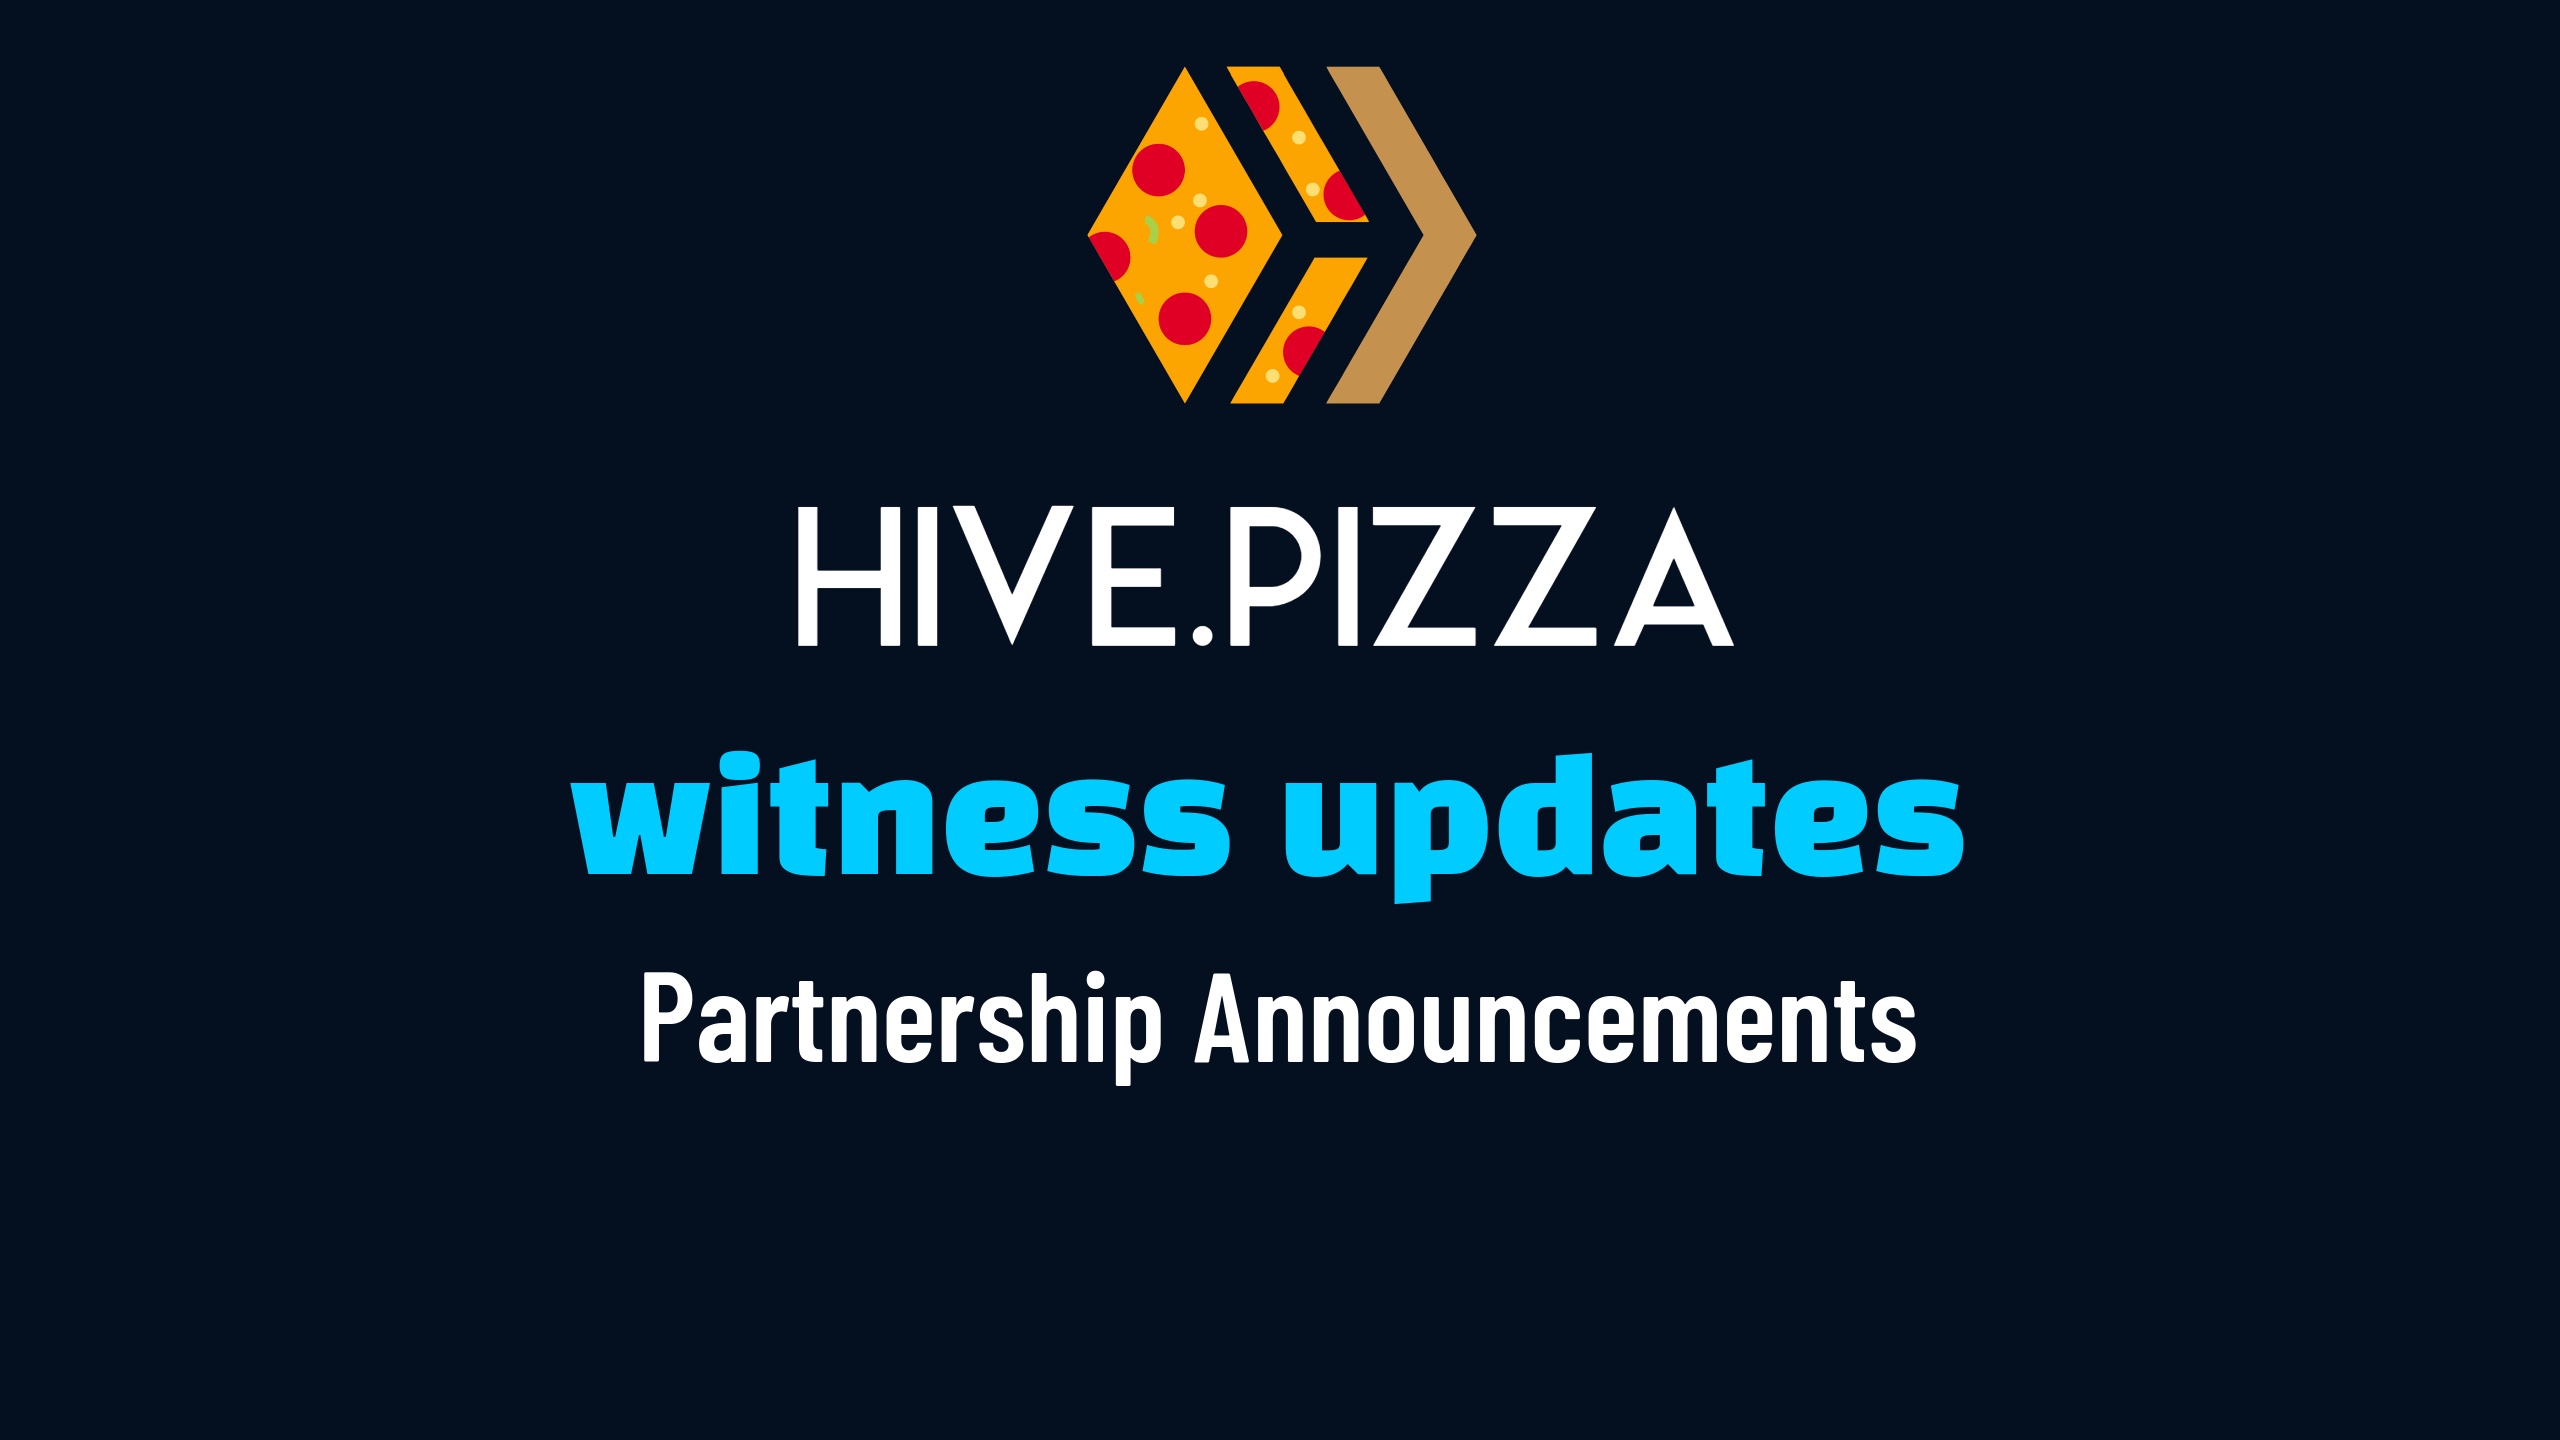 @thebeardflex/hivepizza-or-witness-update-and-partnership-announcements